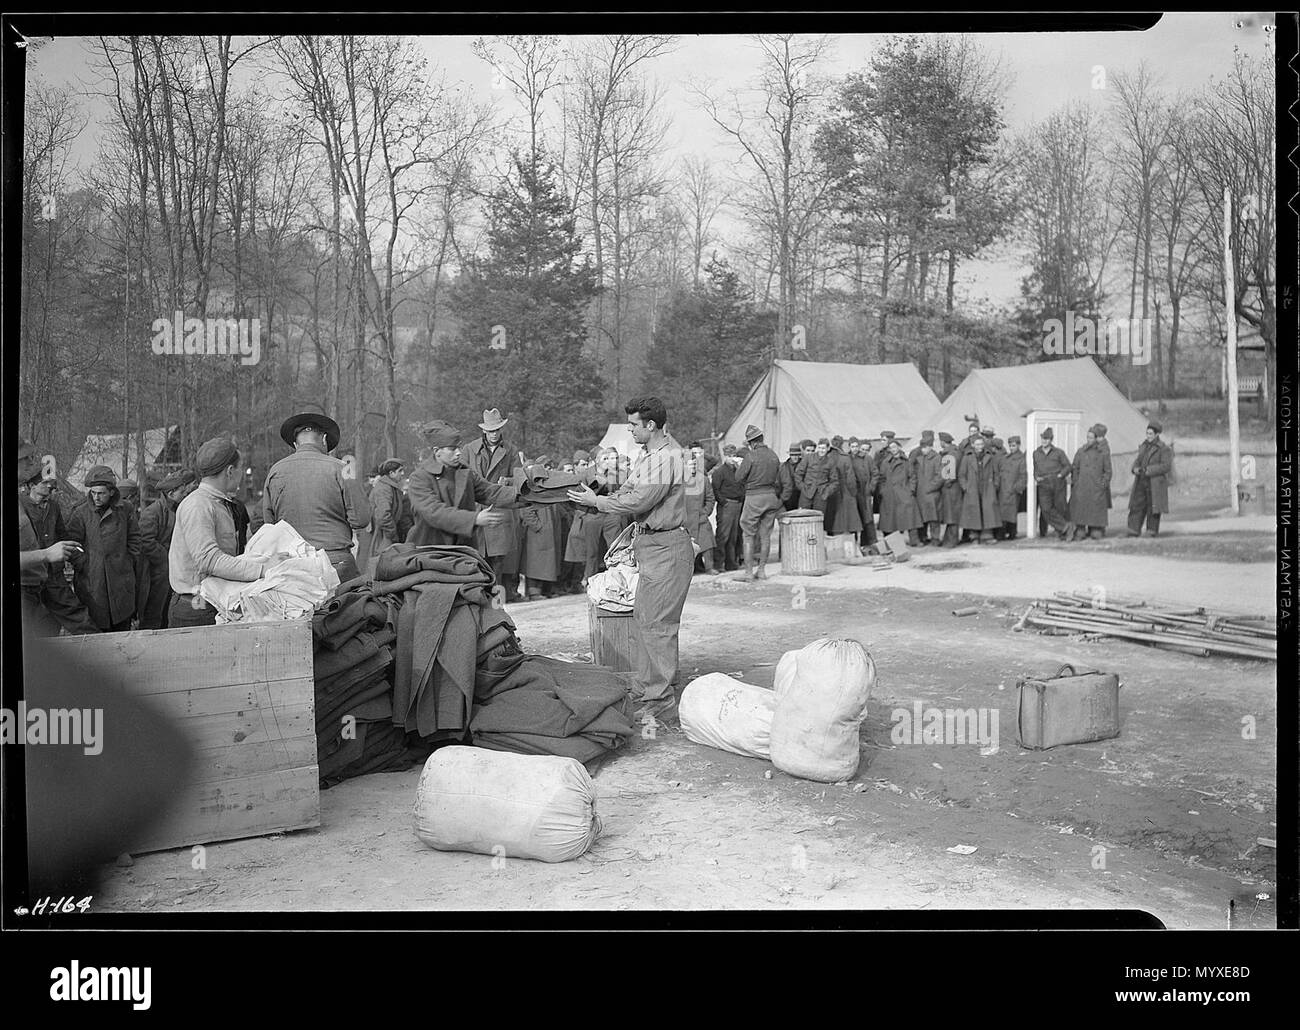 Issuing cots and blankets to new replacements just arrived from New York at CCC Camp, TVA 5E23, located just north of... - Stock Photo